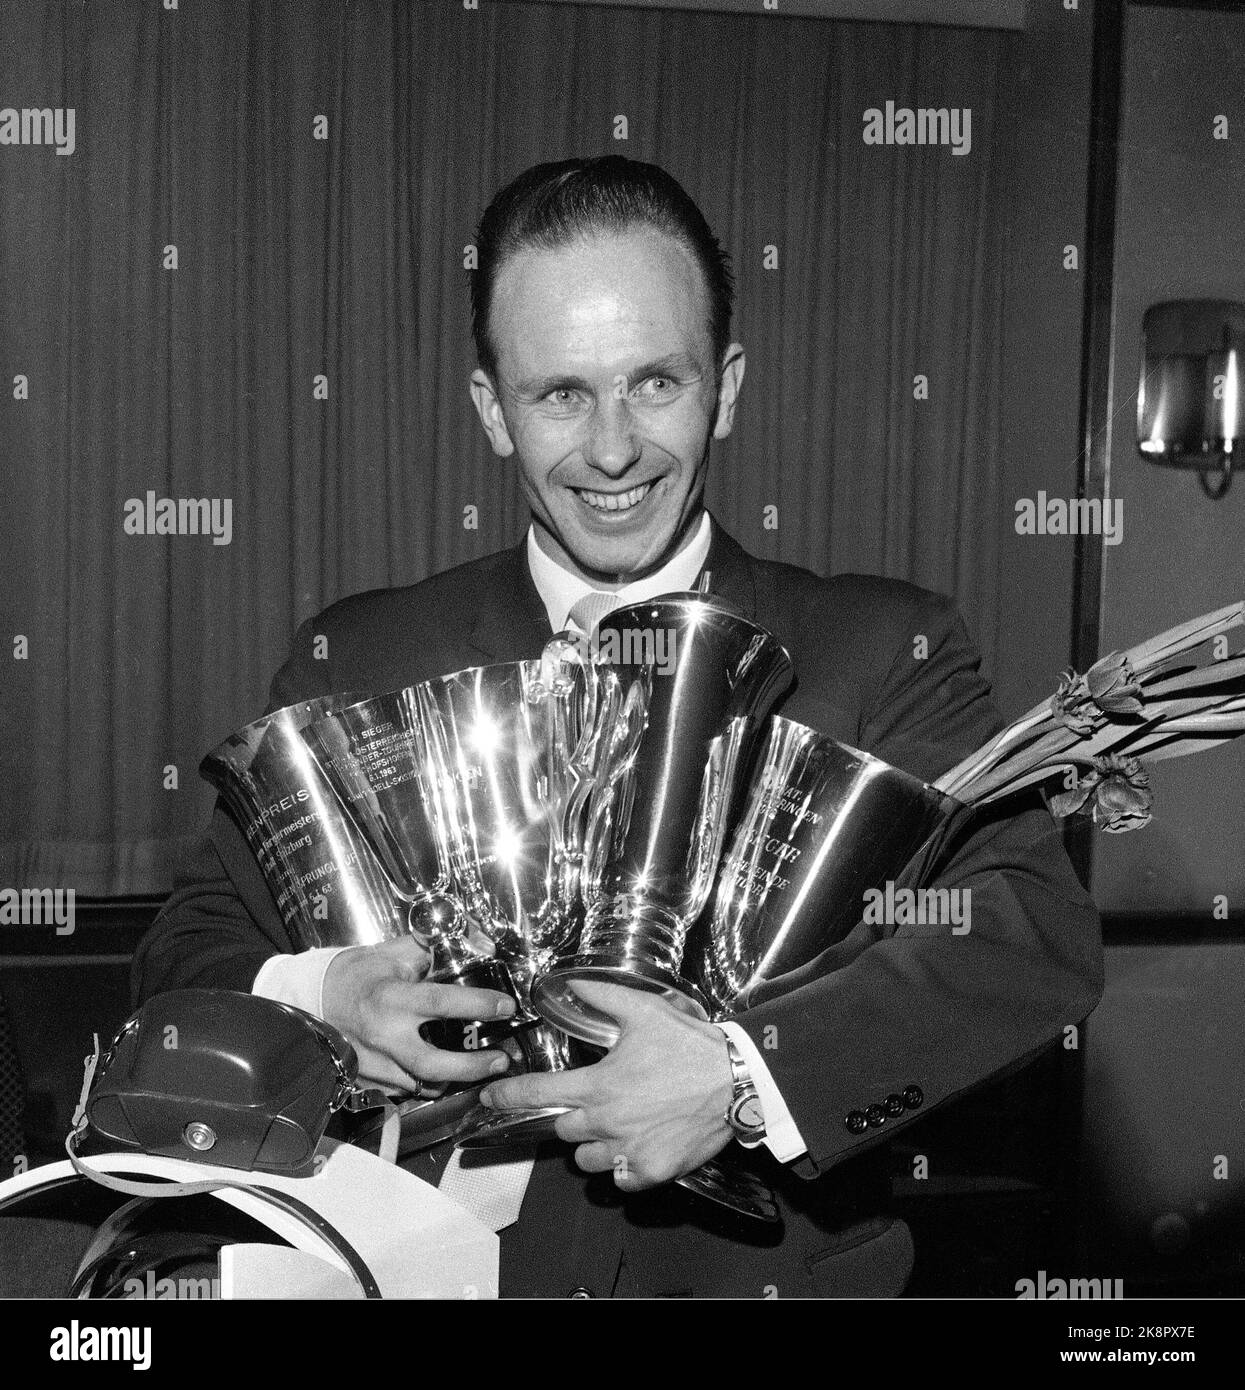 Oslo 19630107 Ski jumper Thoralf Engan with prizes. Smiling image with ...